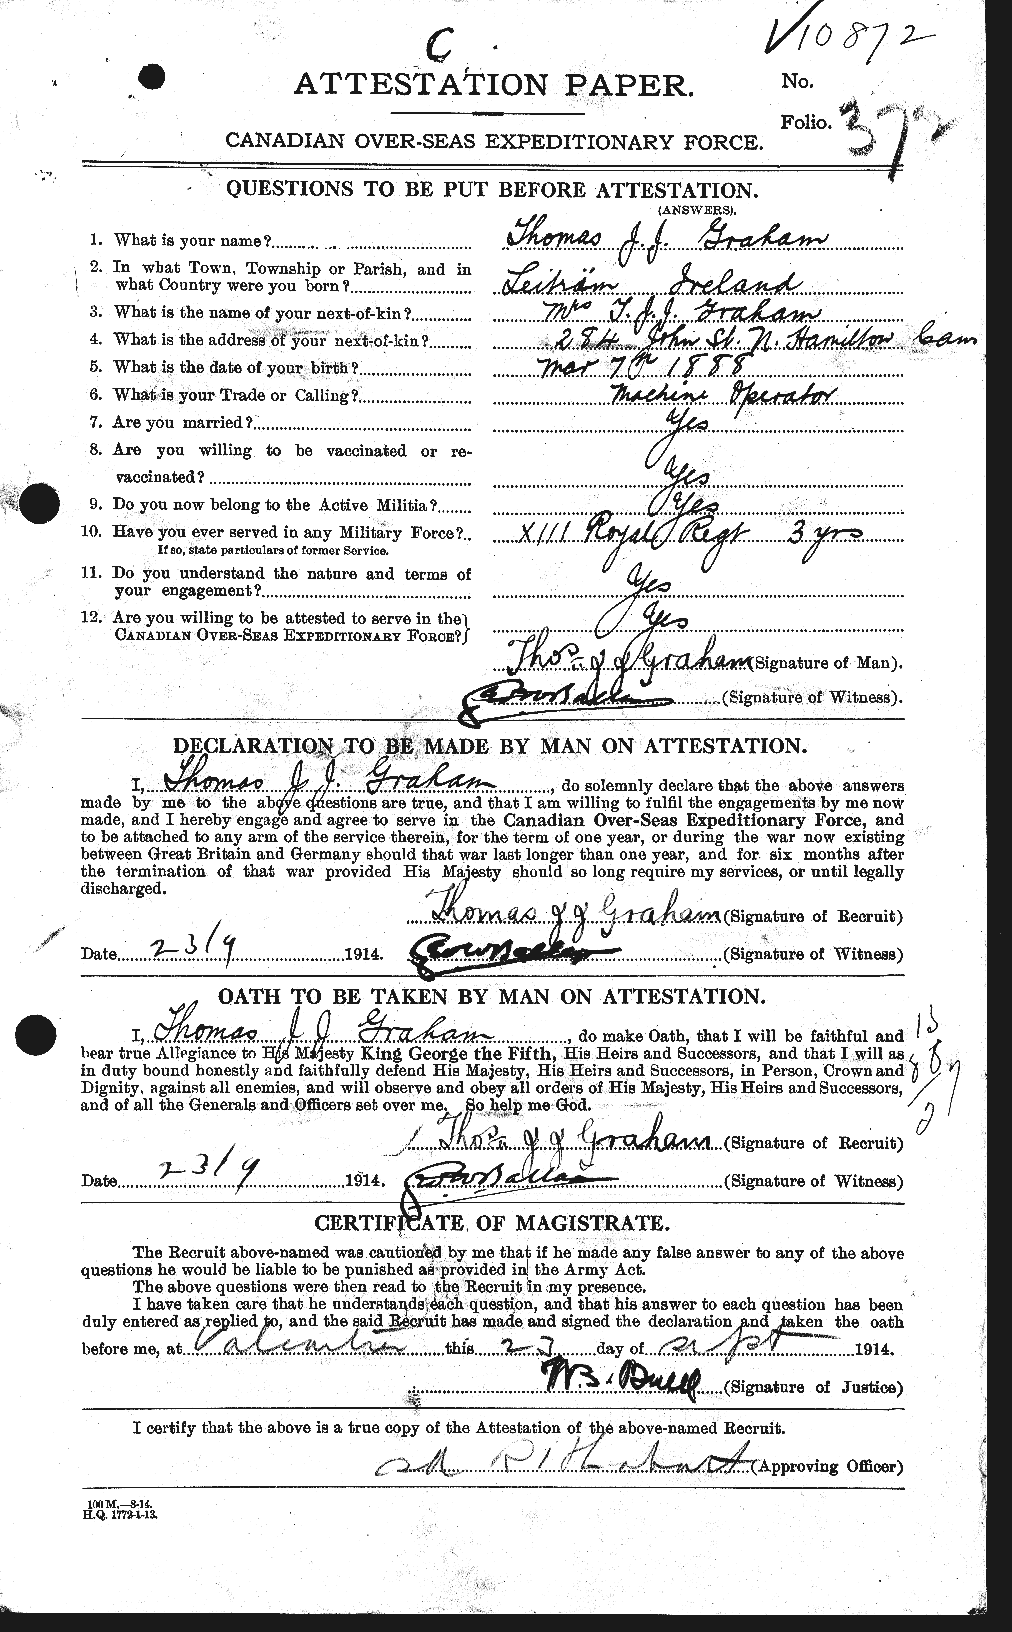 Personnel Records of the First World War - CEF 359522a